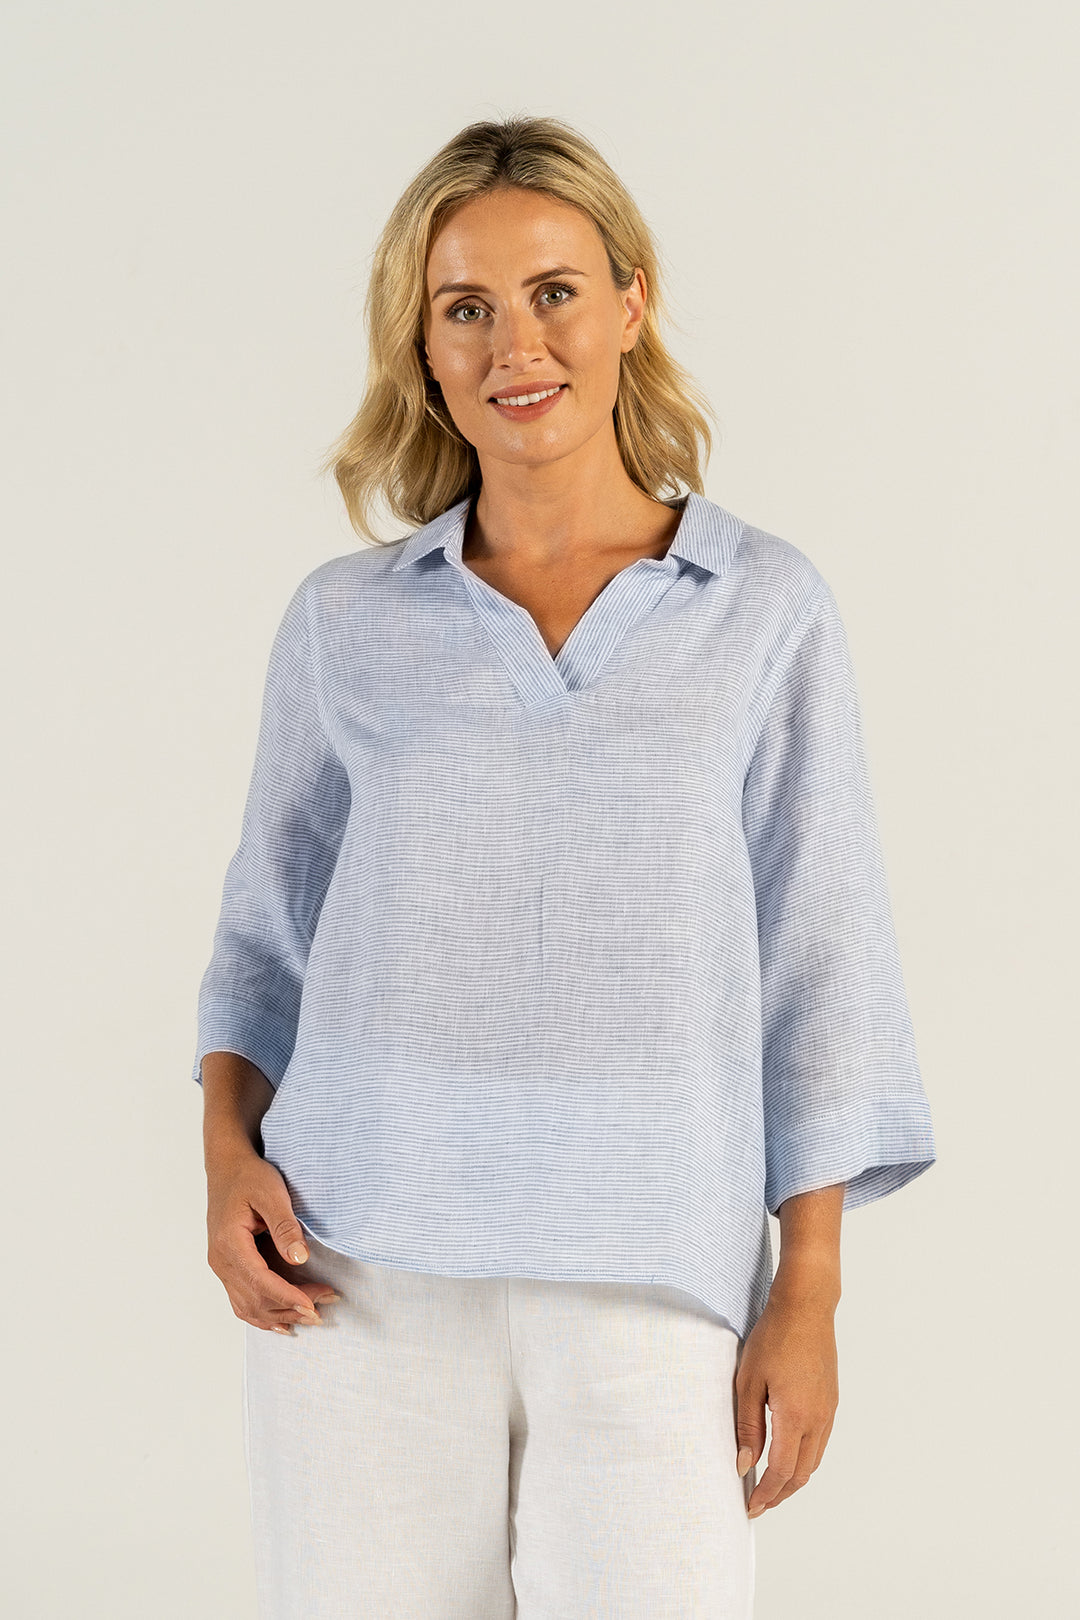 woman wearing a 100% linen top with blue and white stripes by See Saw clothing, sold and shipped from Pizazz Boutique Nelson Bay online women's clothes shops Australia back view